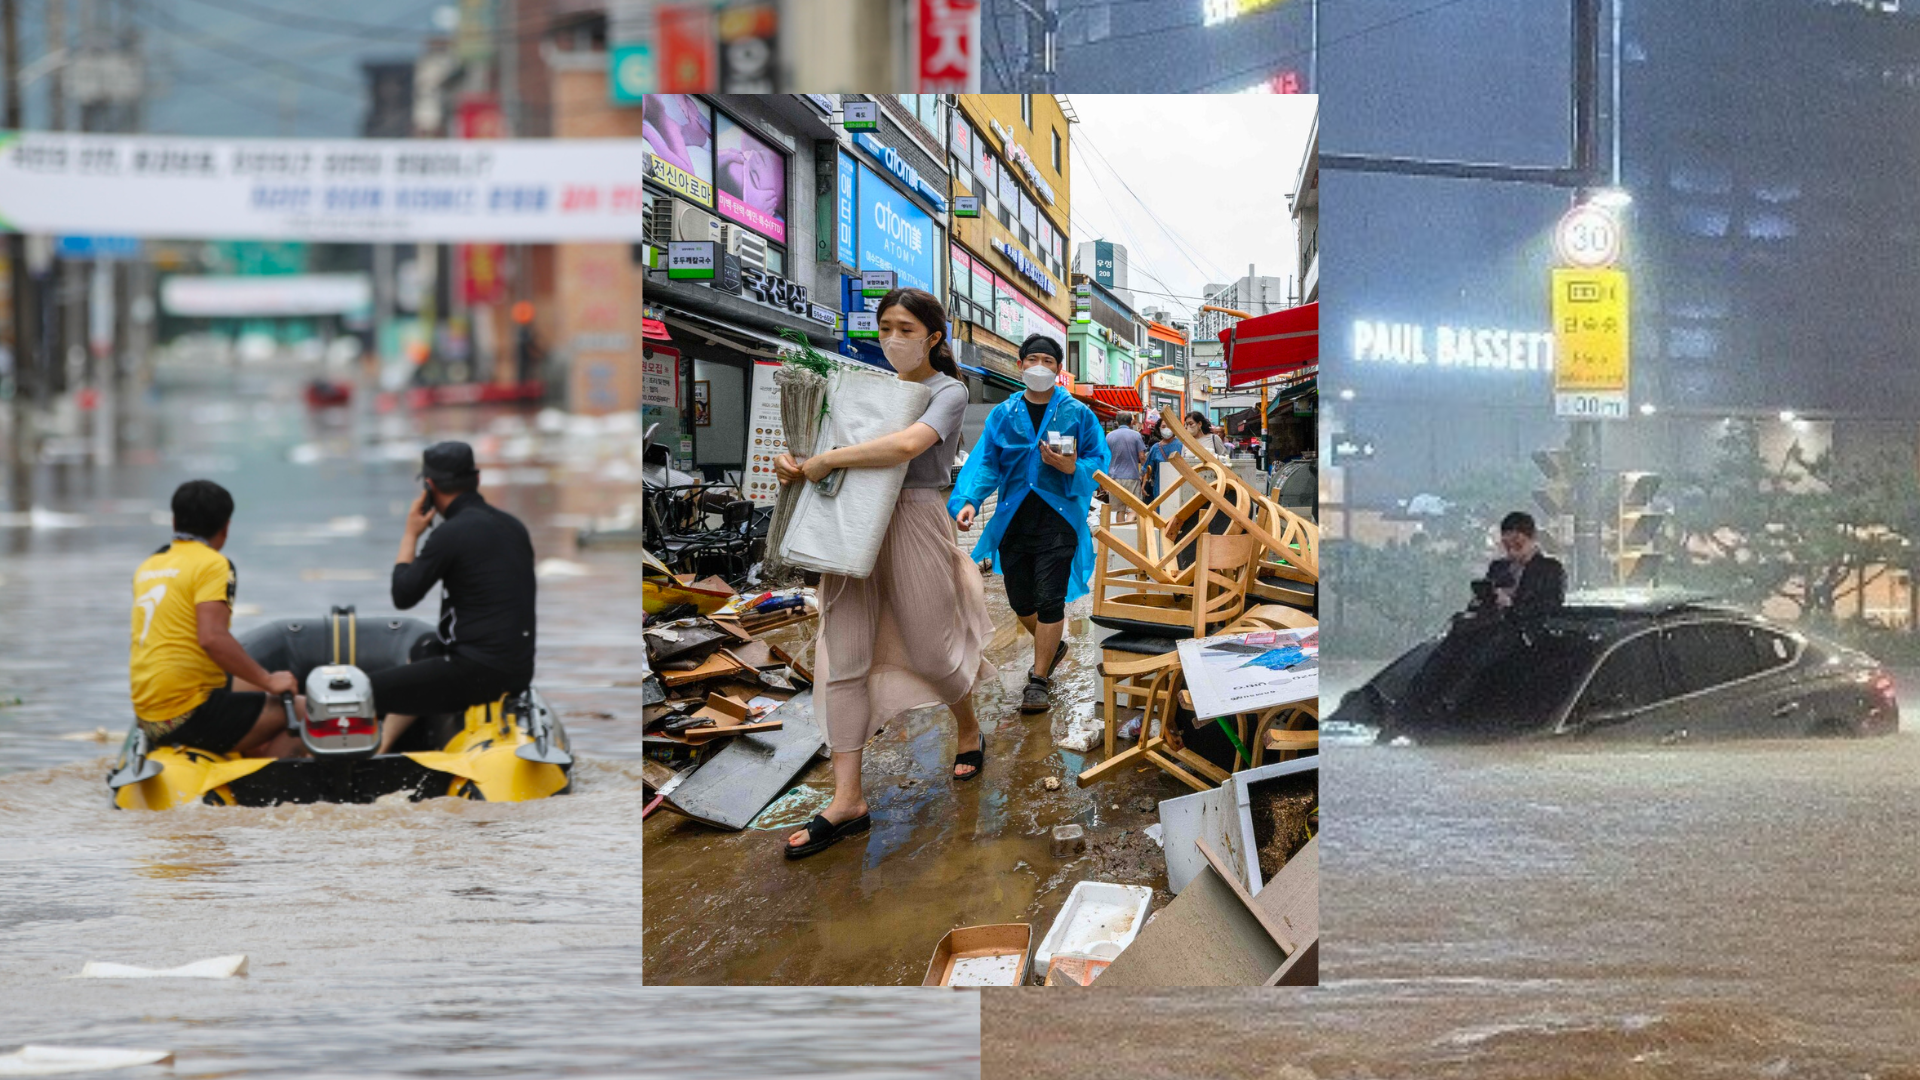 Similar to a scene from a movie, South Korea has been completely flooded due to heavy rainfall.